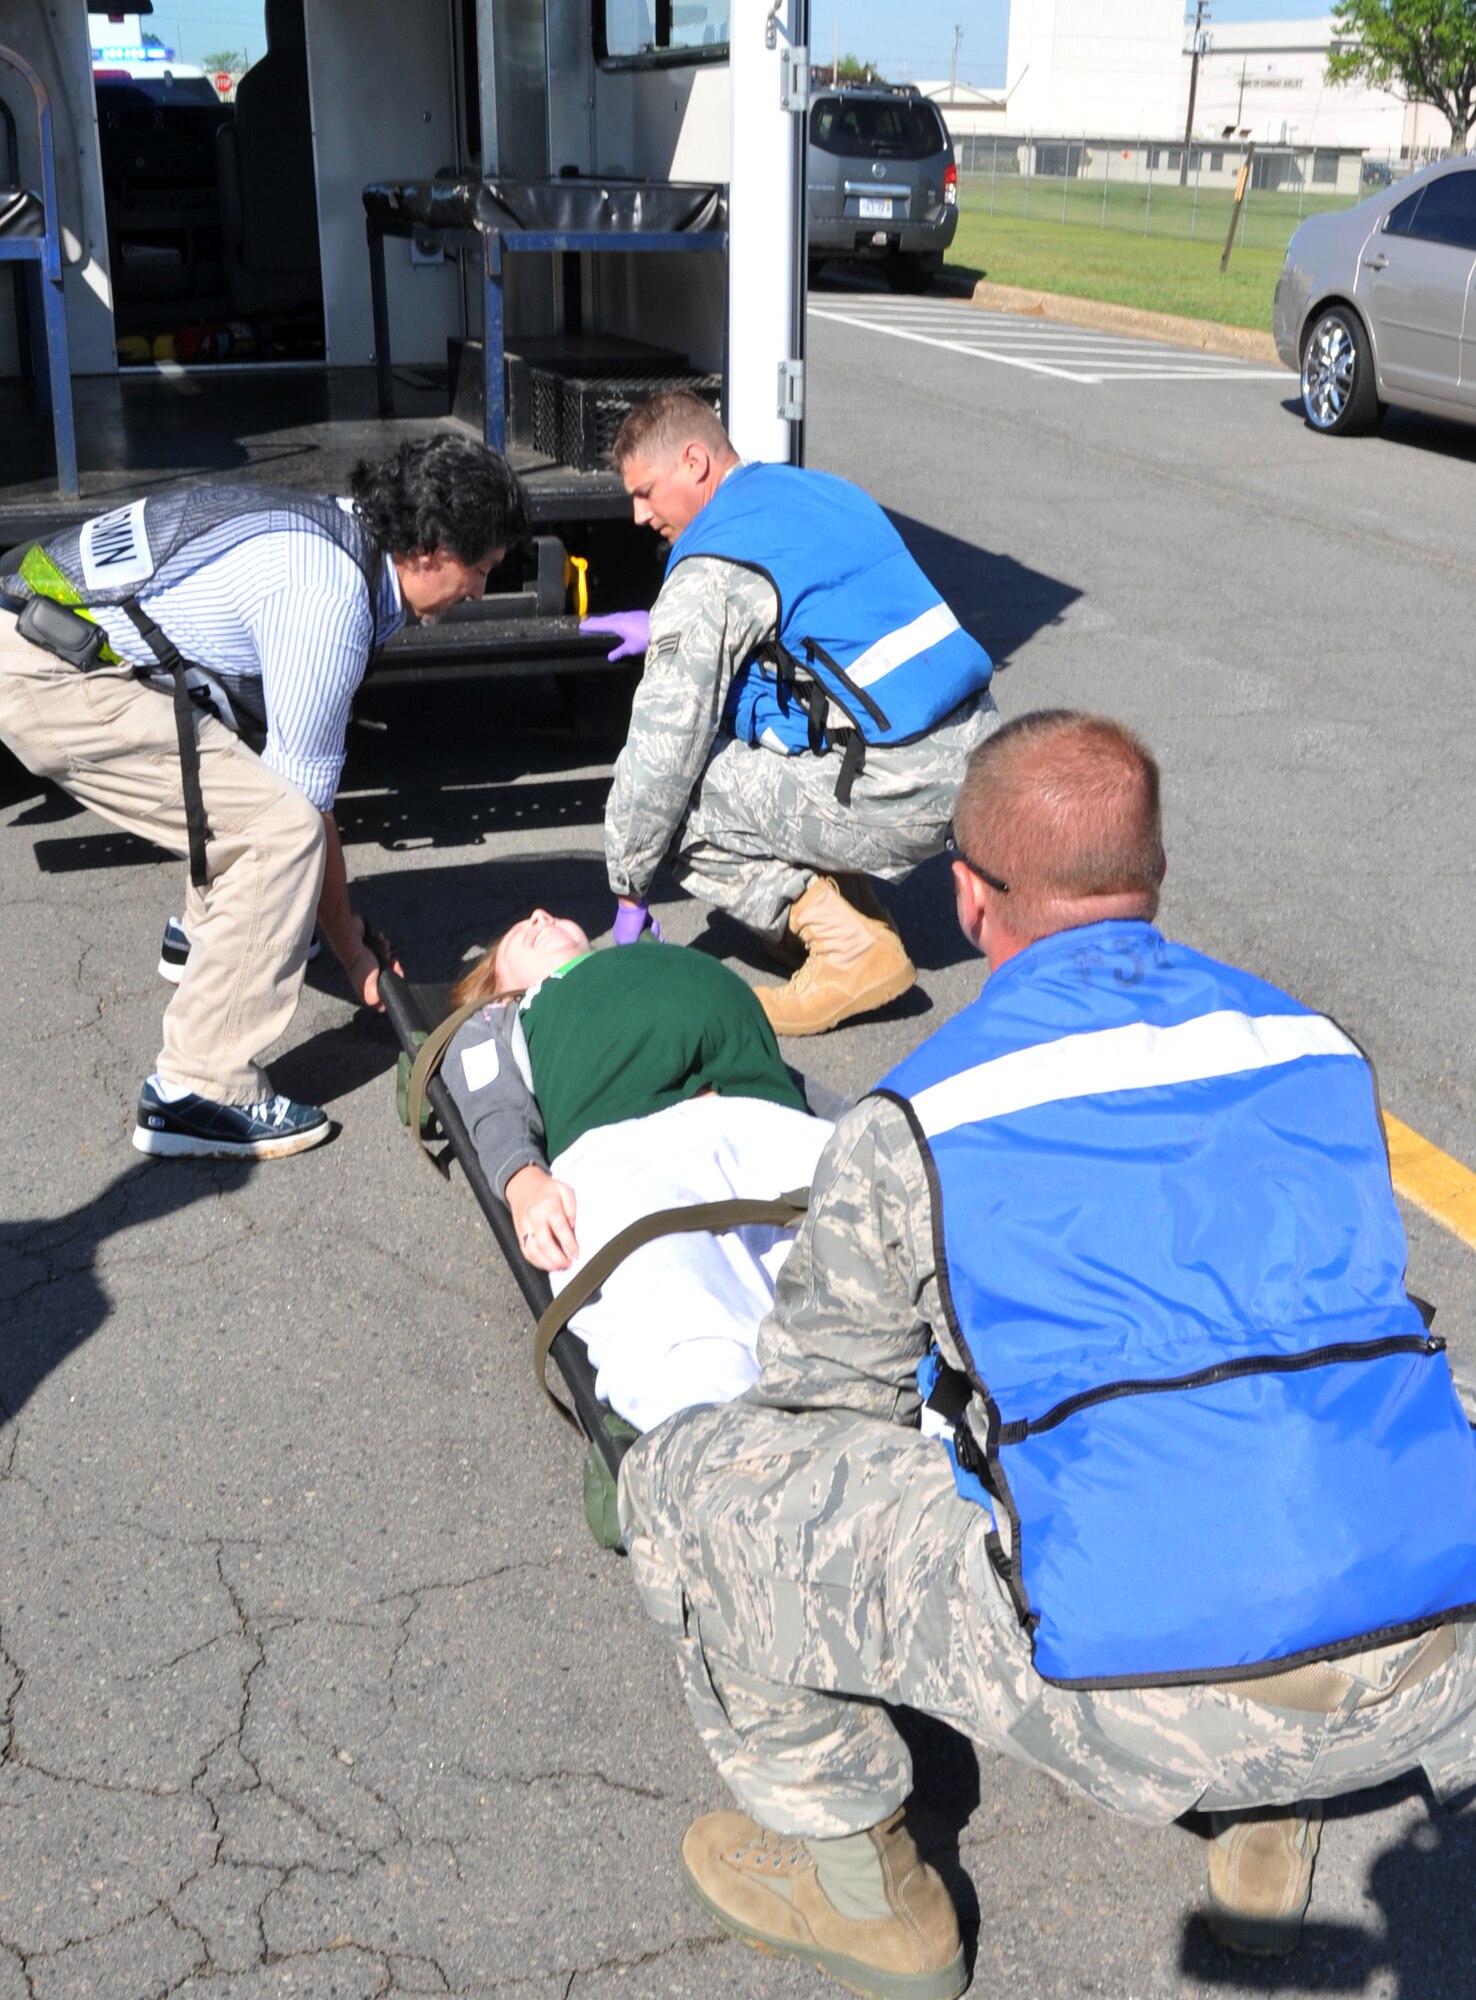 Members of the 19th Medical Group first responder team transport a simulated casualty after a major accident response exercise April 12, 2011, at Little Rock Air Force Base, Ark. Team Little Rock members participated in the MARE to stay current with their training in case of a real world event. (U.S. Air Force photo by Airman 1st Class Rusty Frank)